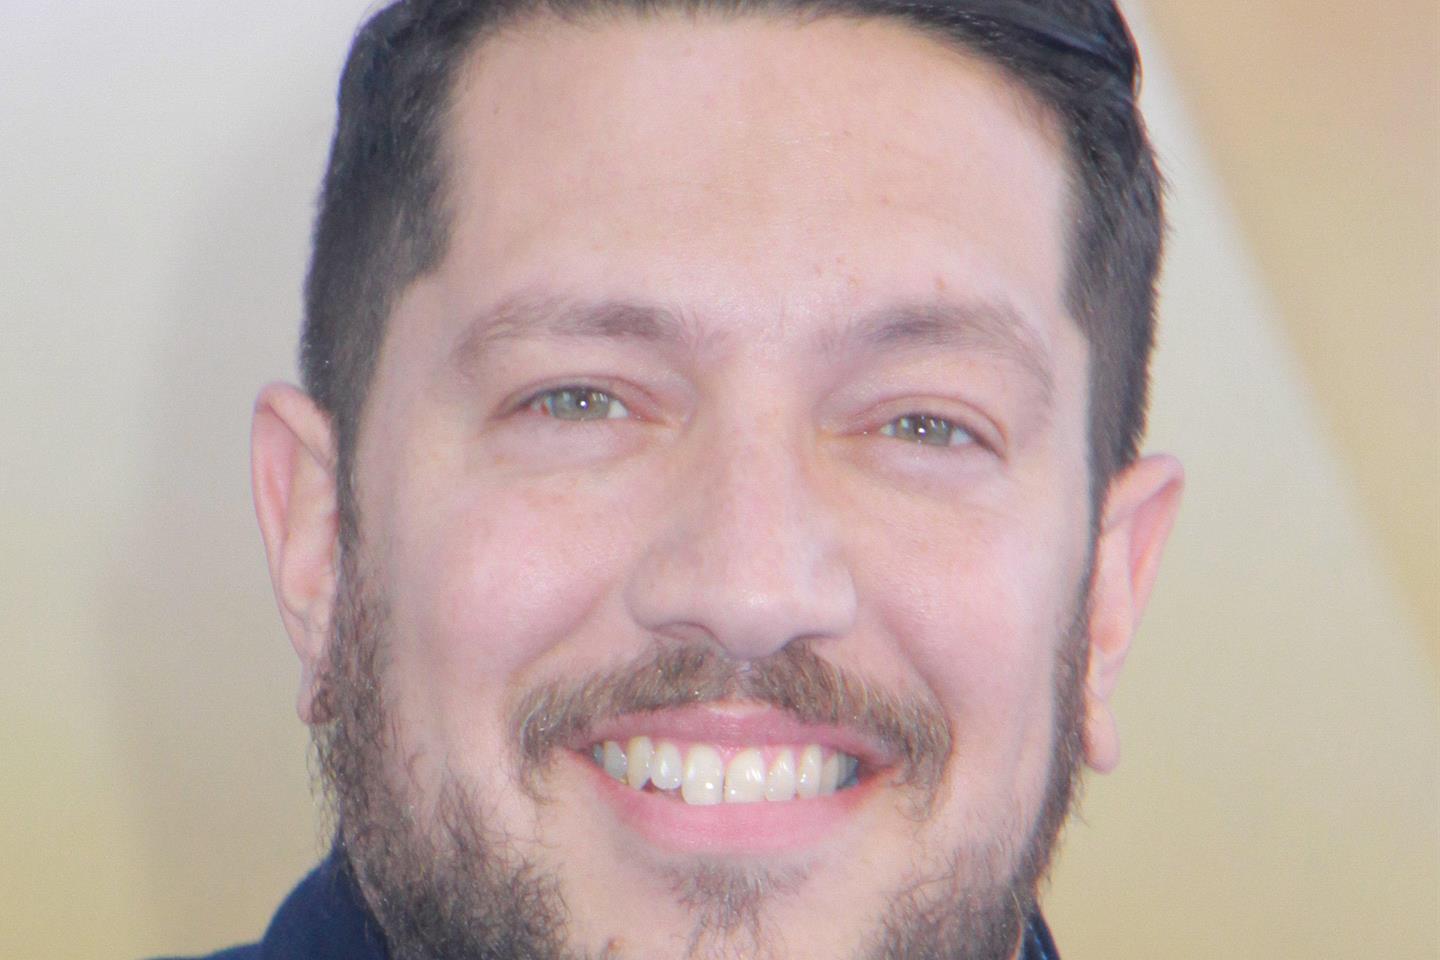 Sal Vulcano Tickets Buy or Sell Tickets for Sal Vulcano Tour Dates